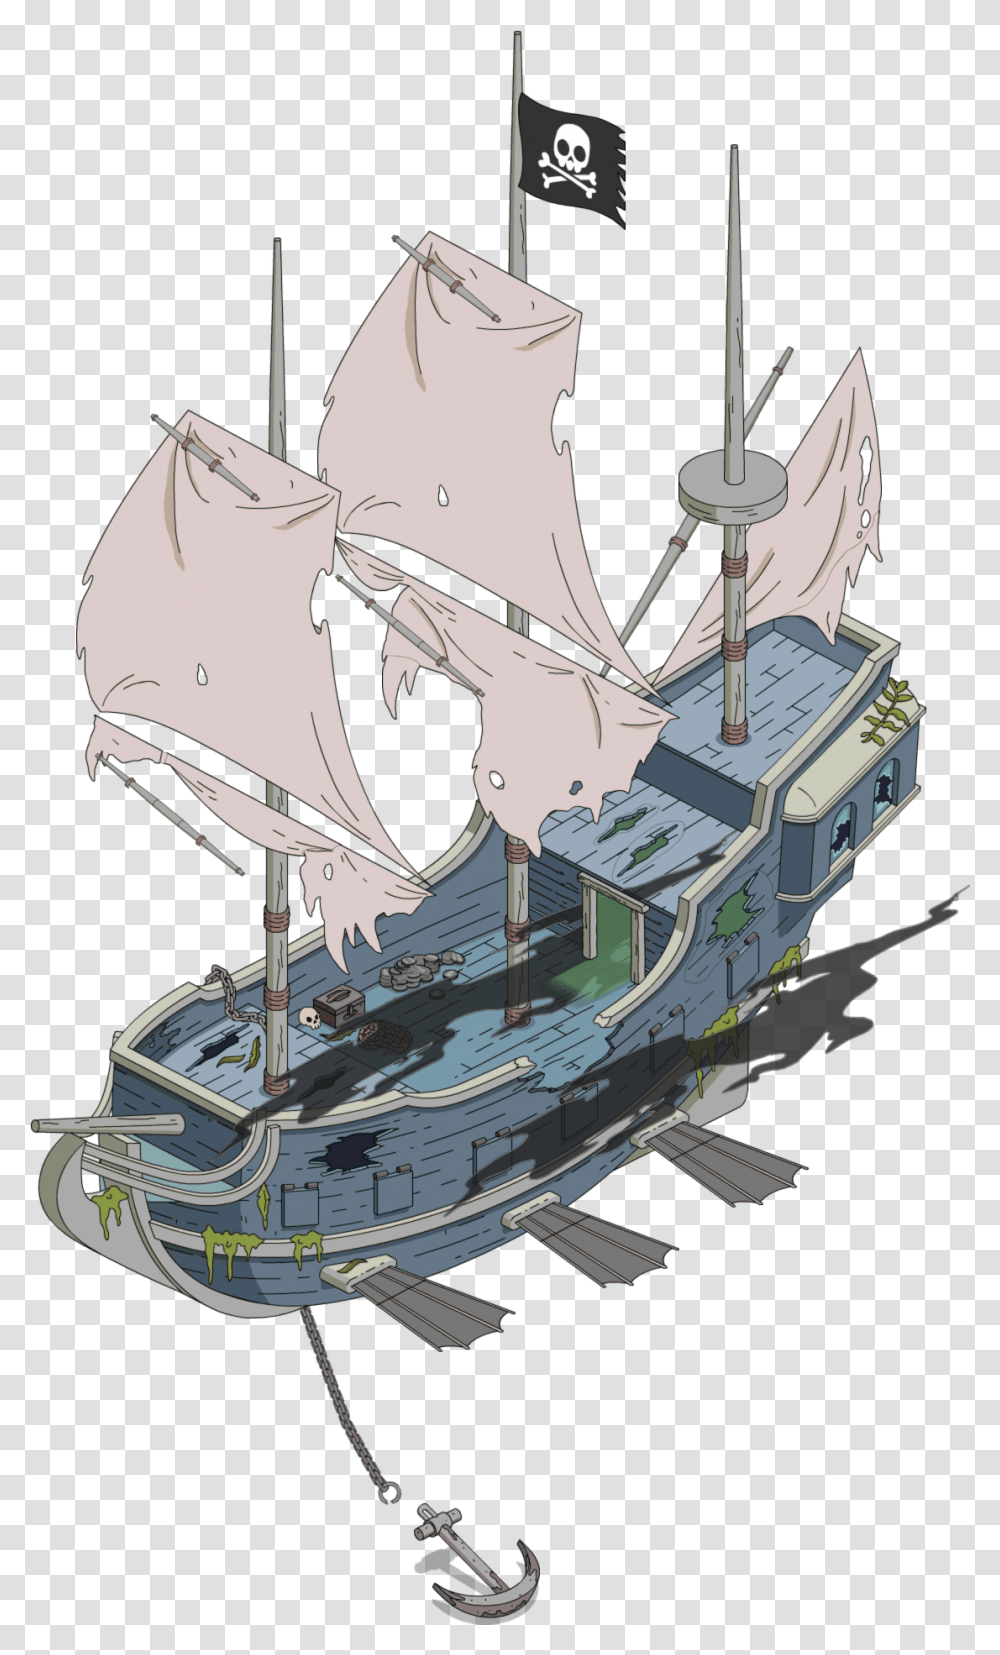 Tapped Out Ghost Pirate Airship Simpsons Tapped Out Boat, Vehicle, Transportation, Aircraft, Spaceship Transparent Png